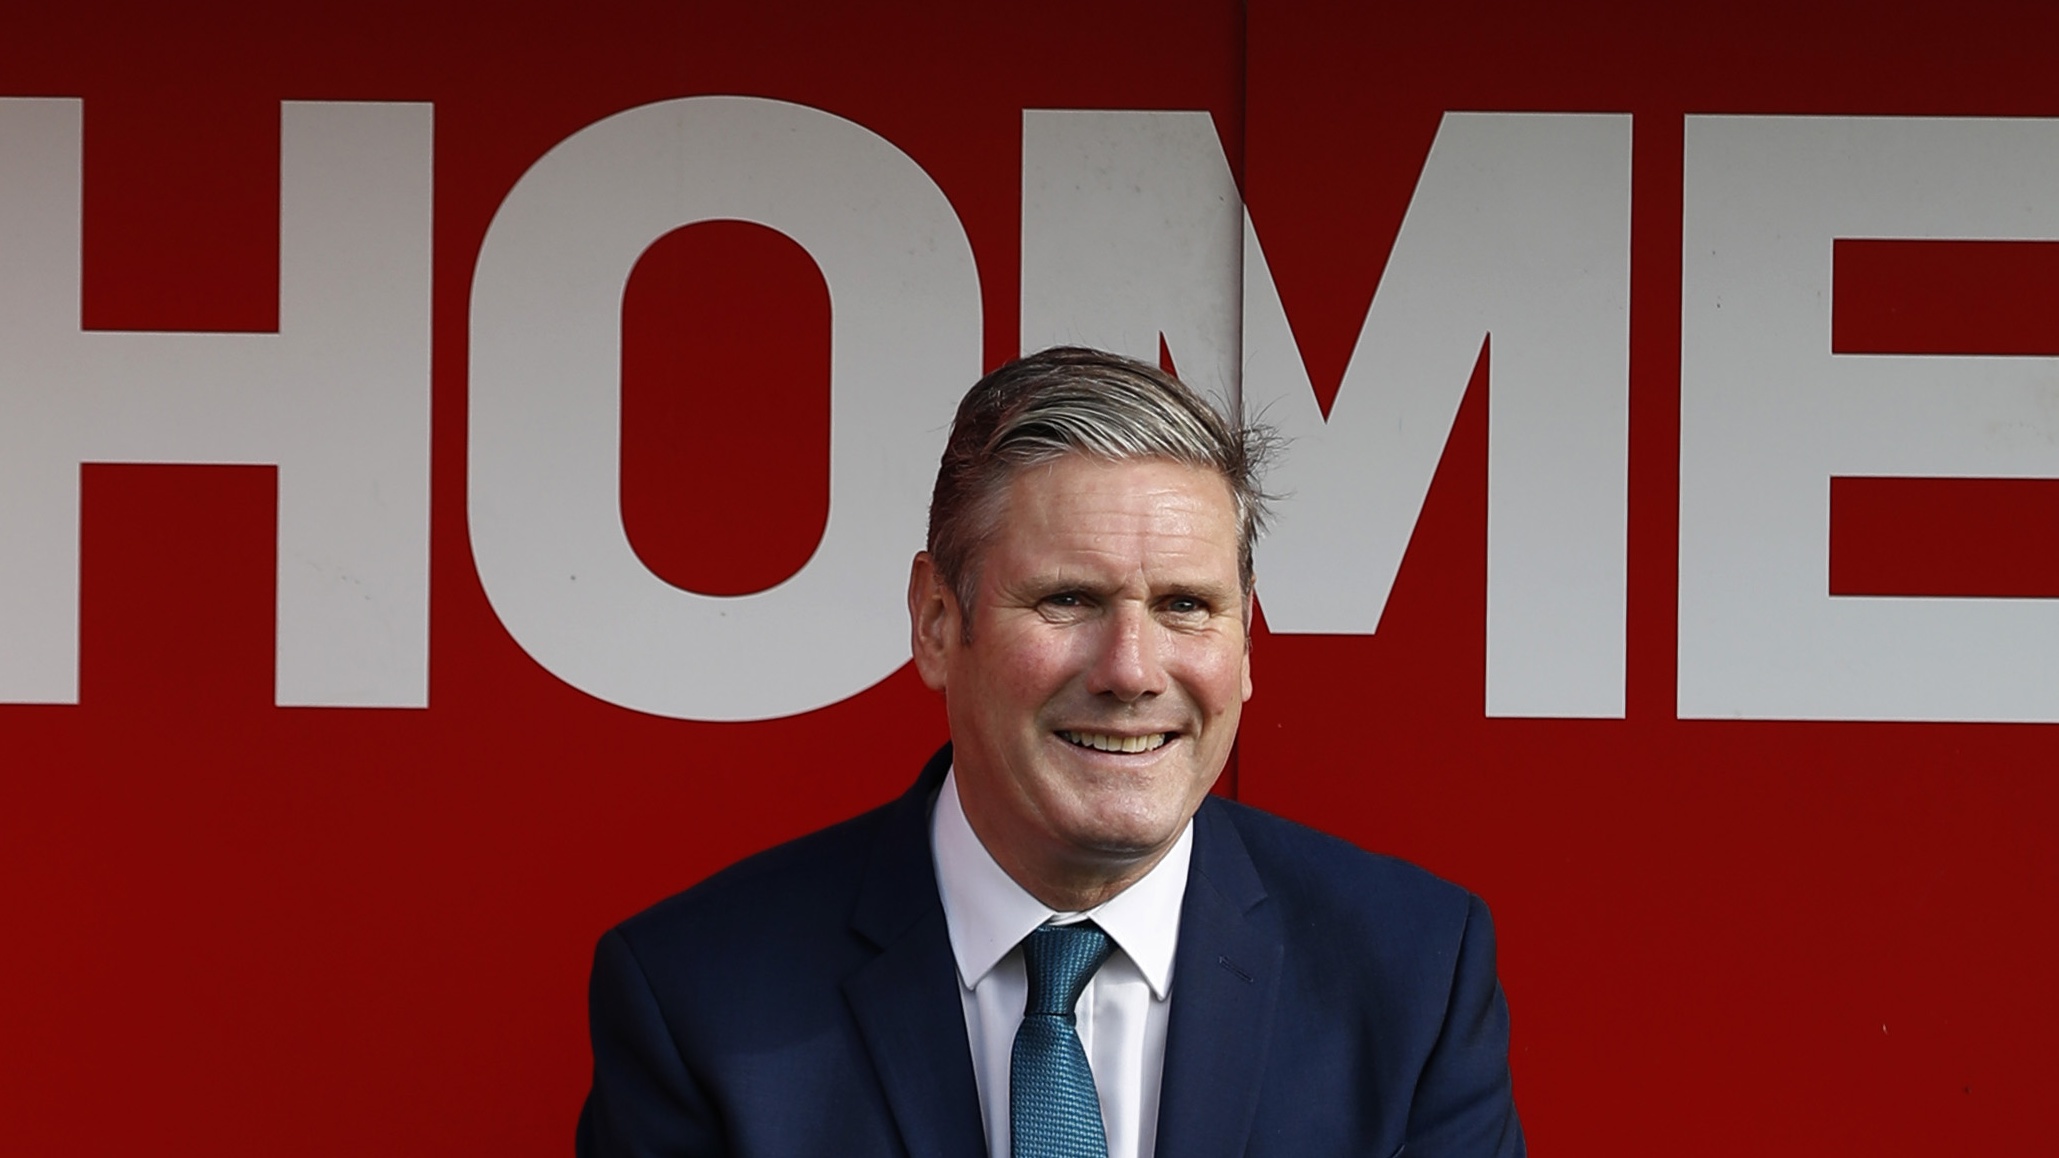 Keir Starmer during a visit to Walsall football club